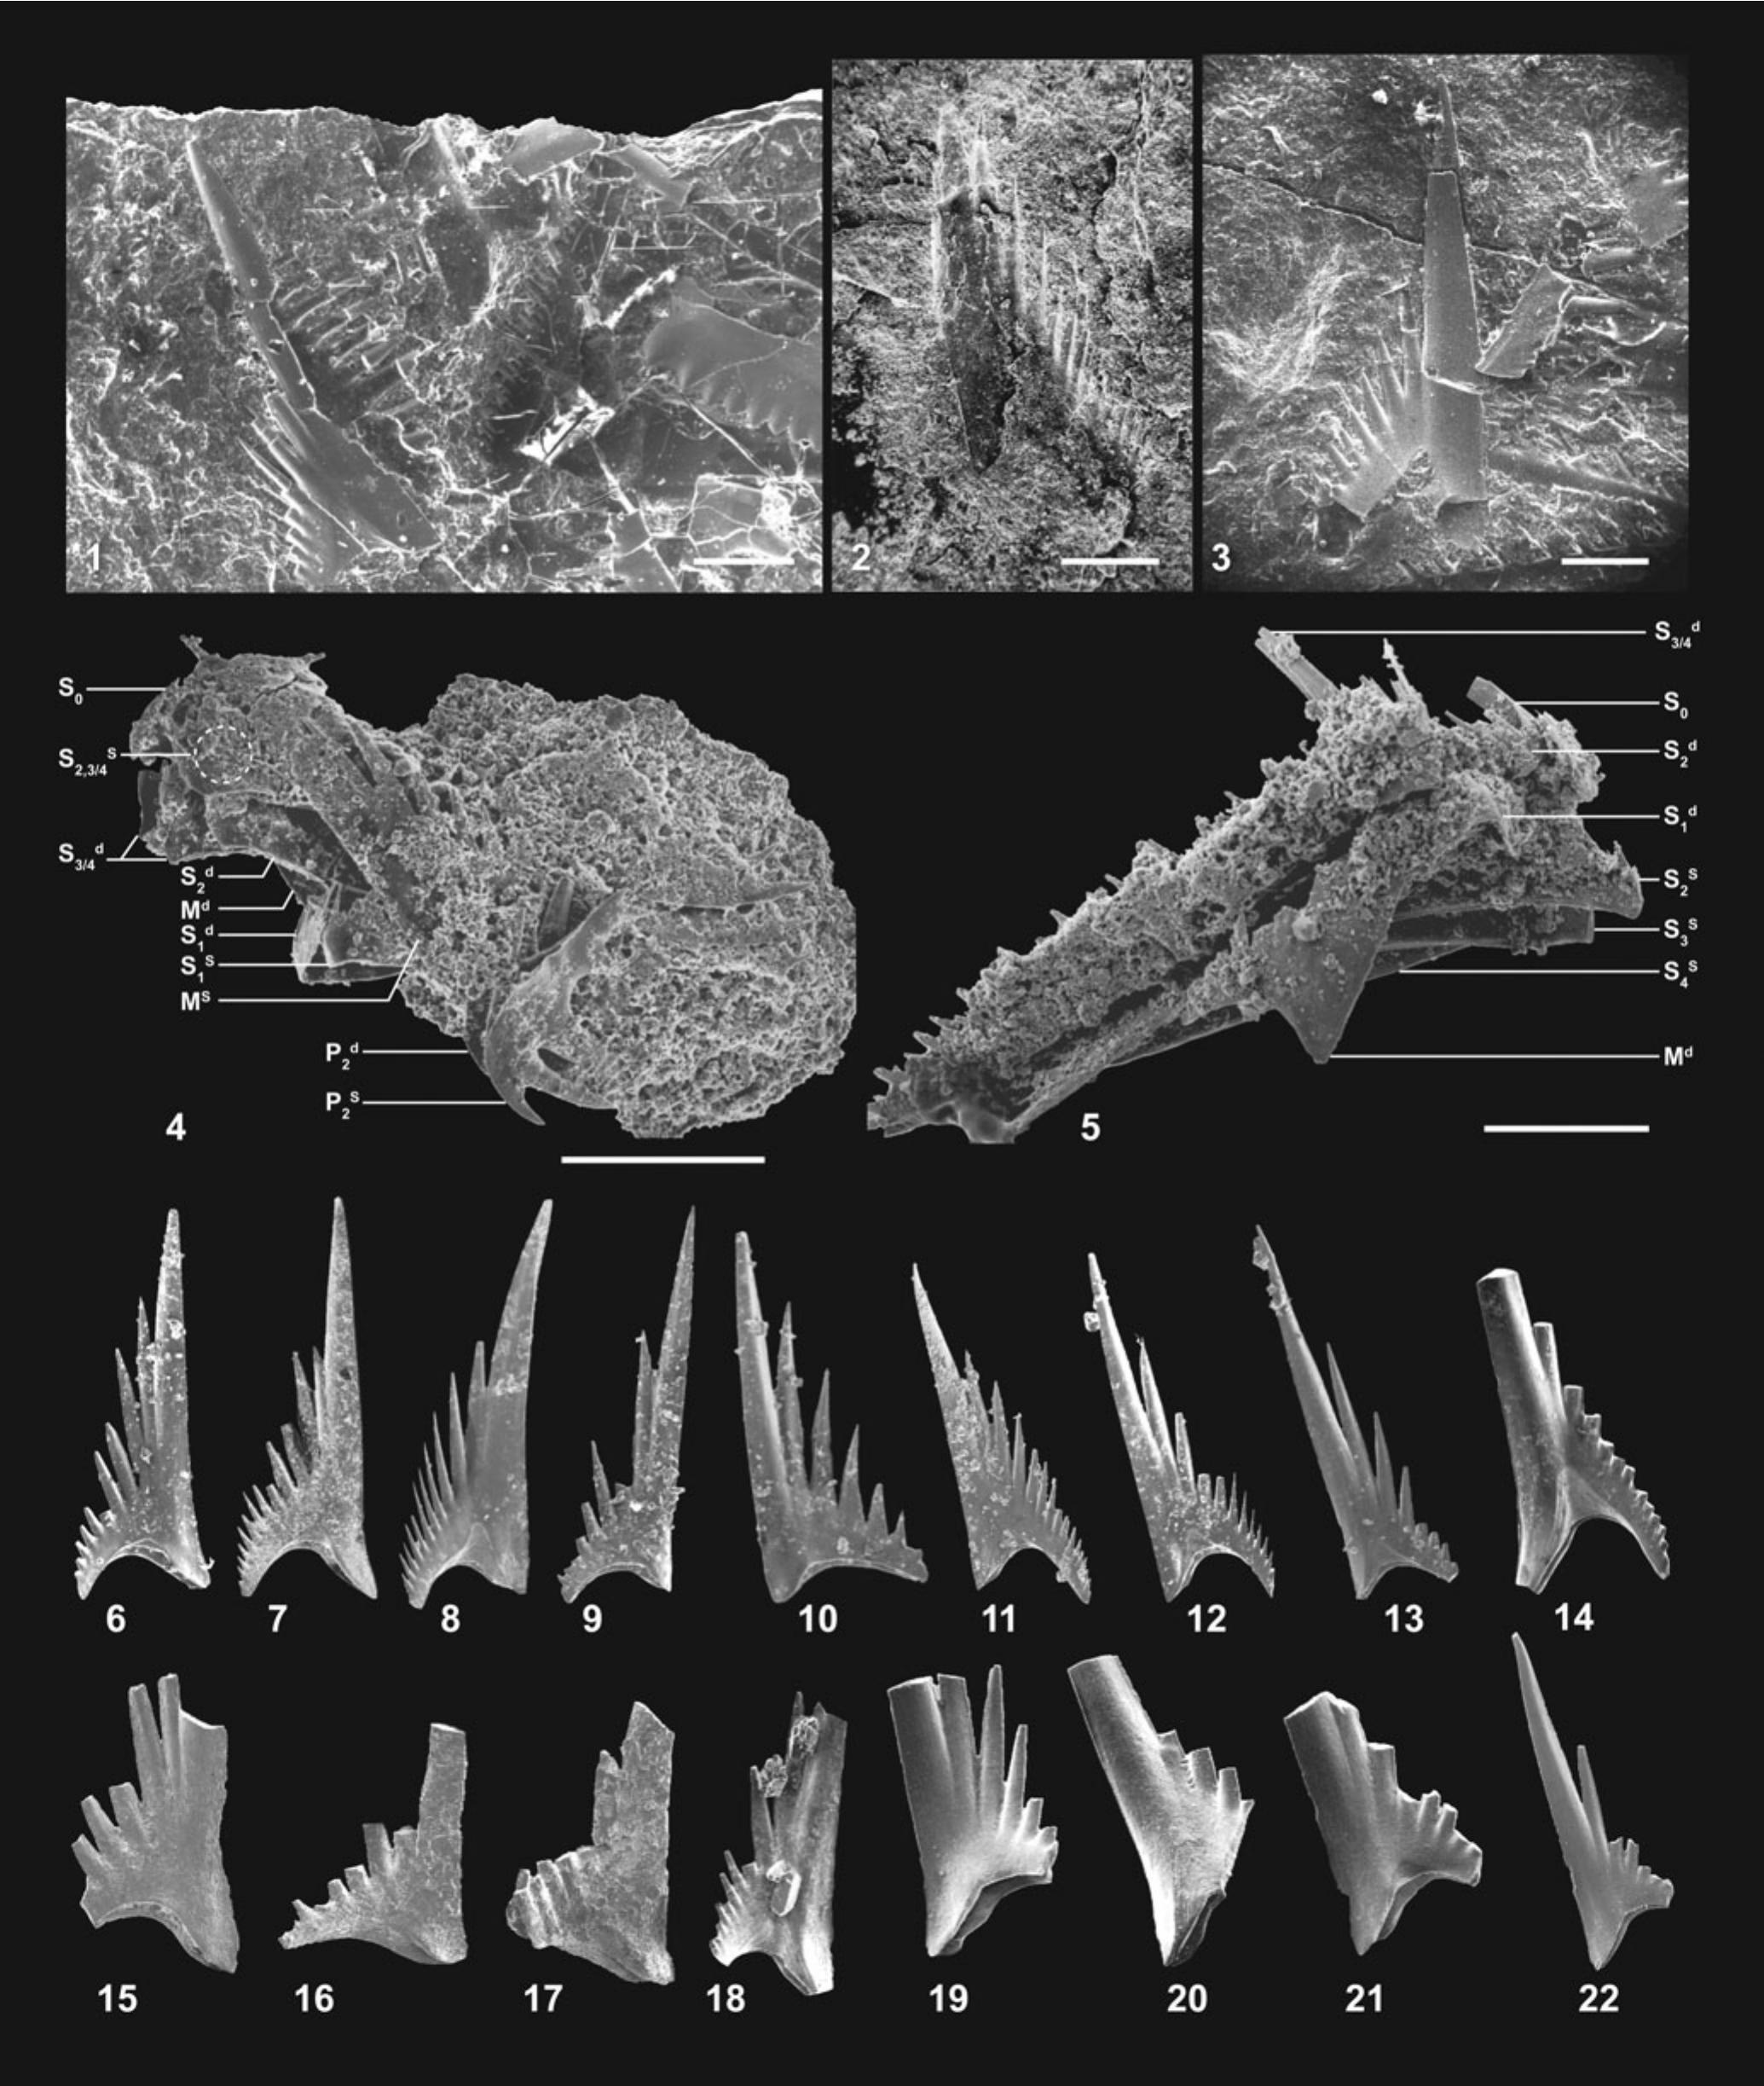 The Carboniferous conodont Lochriea commutata (Branson and Mehl, 1941), the  type species of Lochriea Scott, 1942: nomenclatural history, apparatus  composition and effects on Lochriea species